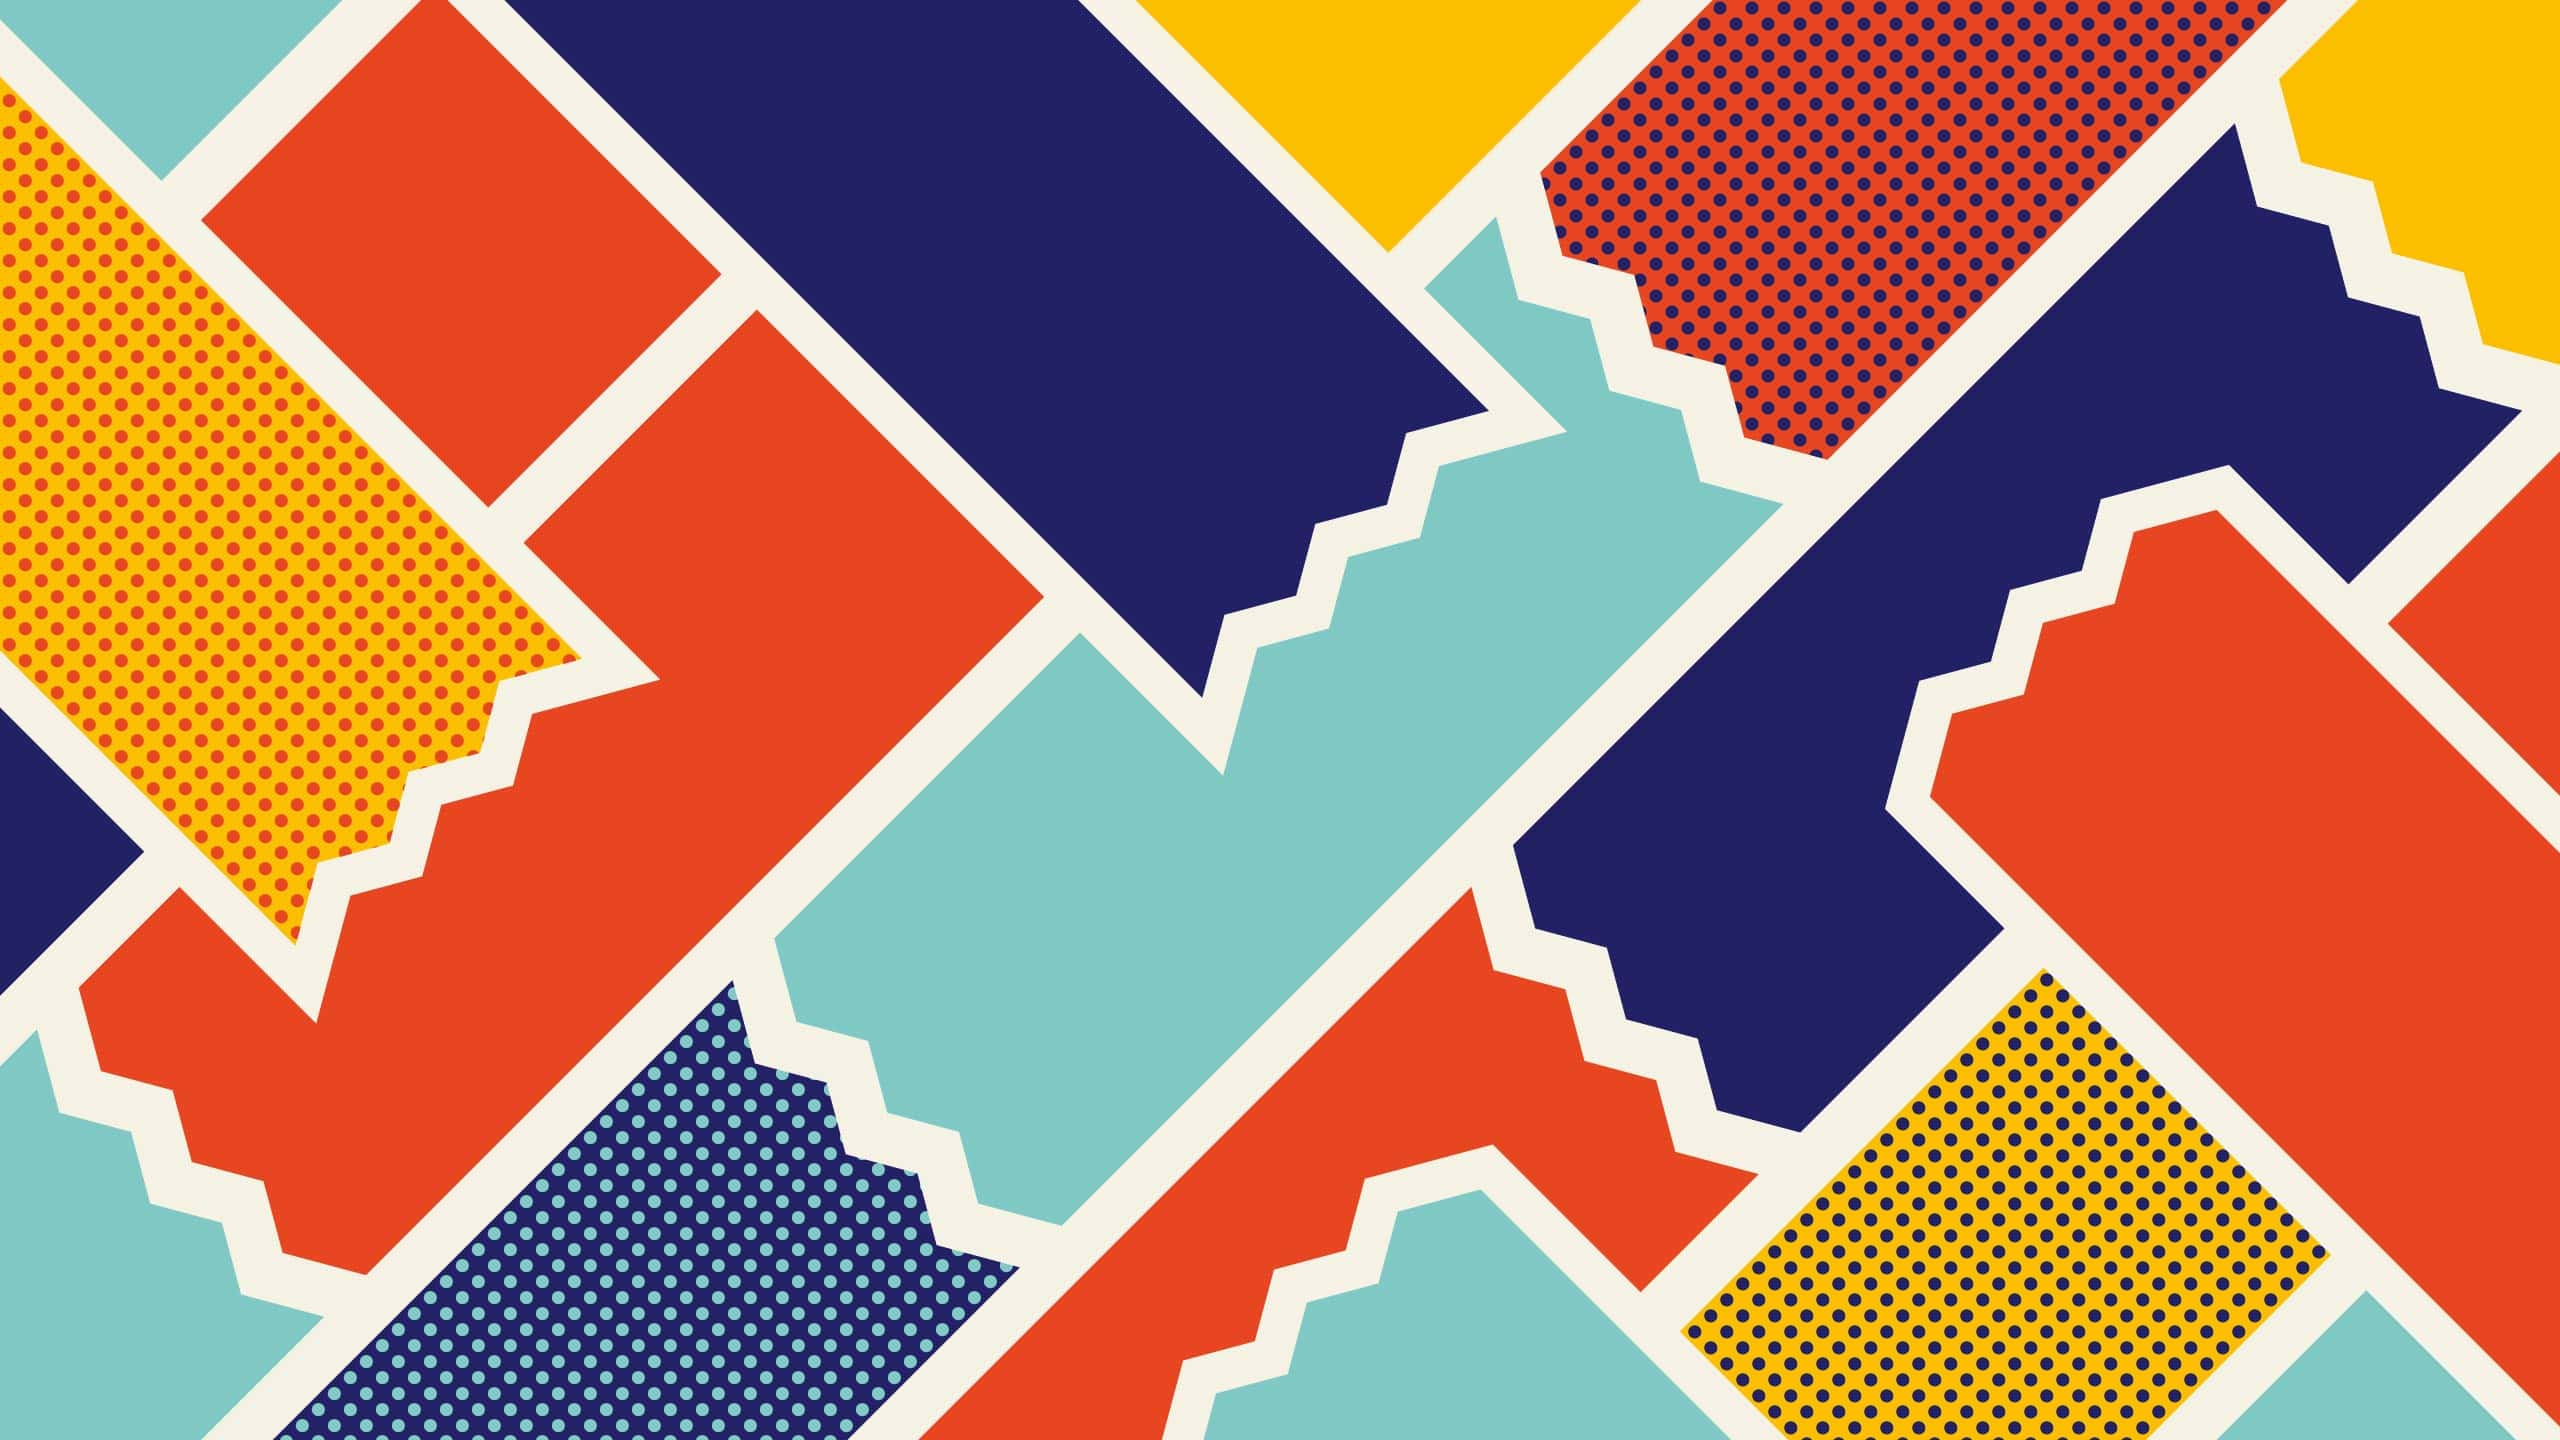 A fun and colorful pattern made from the shape of SticTac's logo